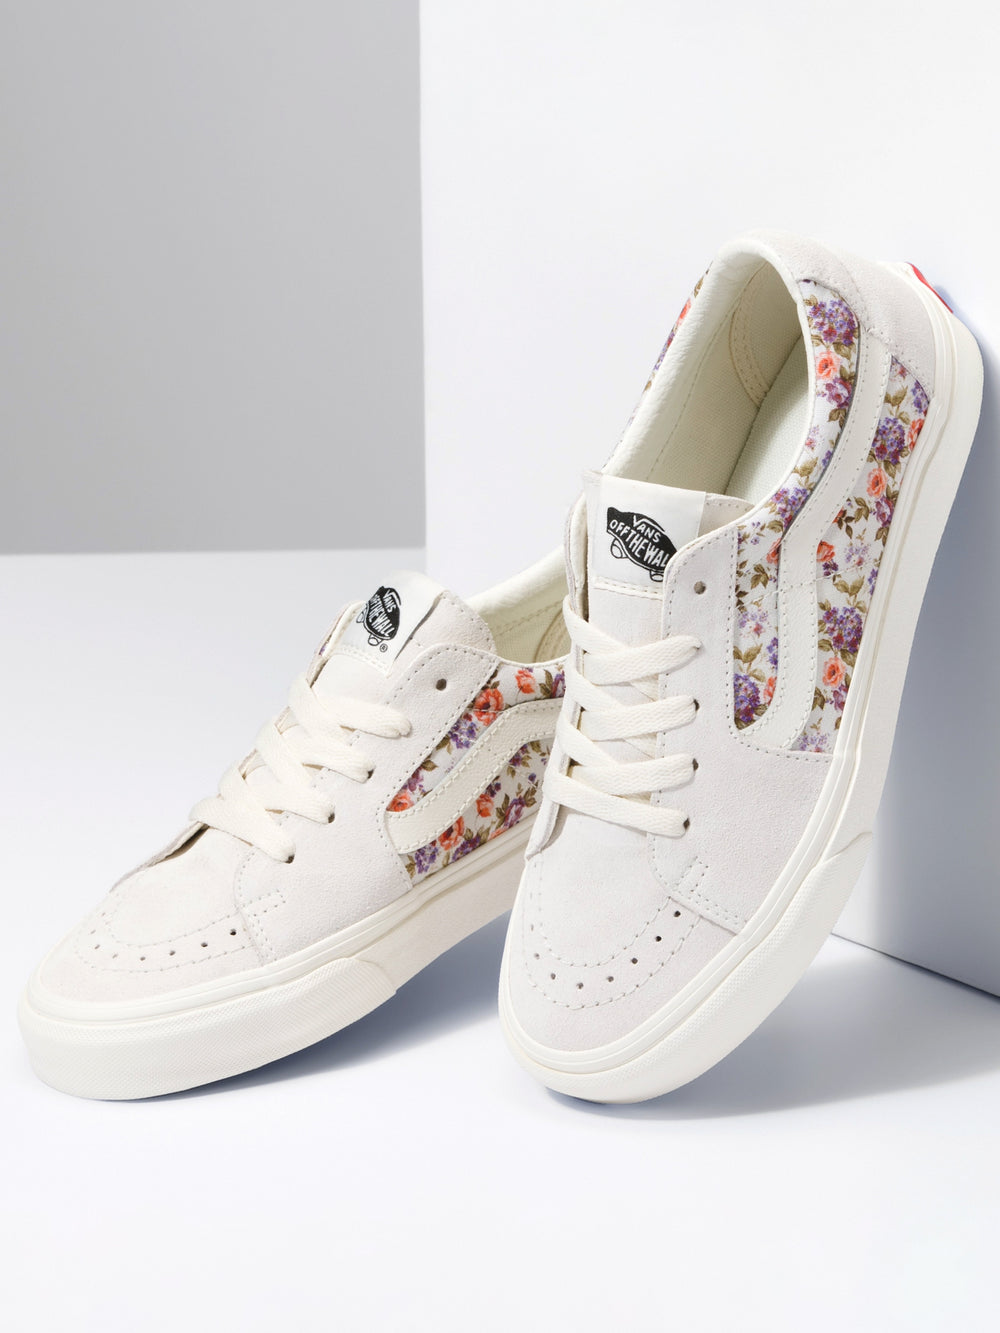 WOMENS VANS SK8 LO - CLEARANCE